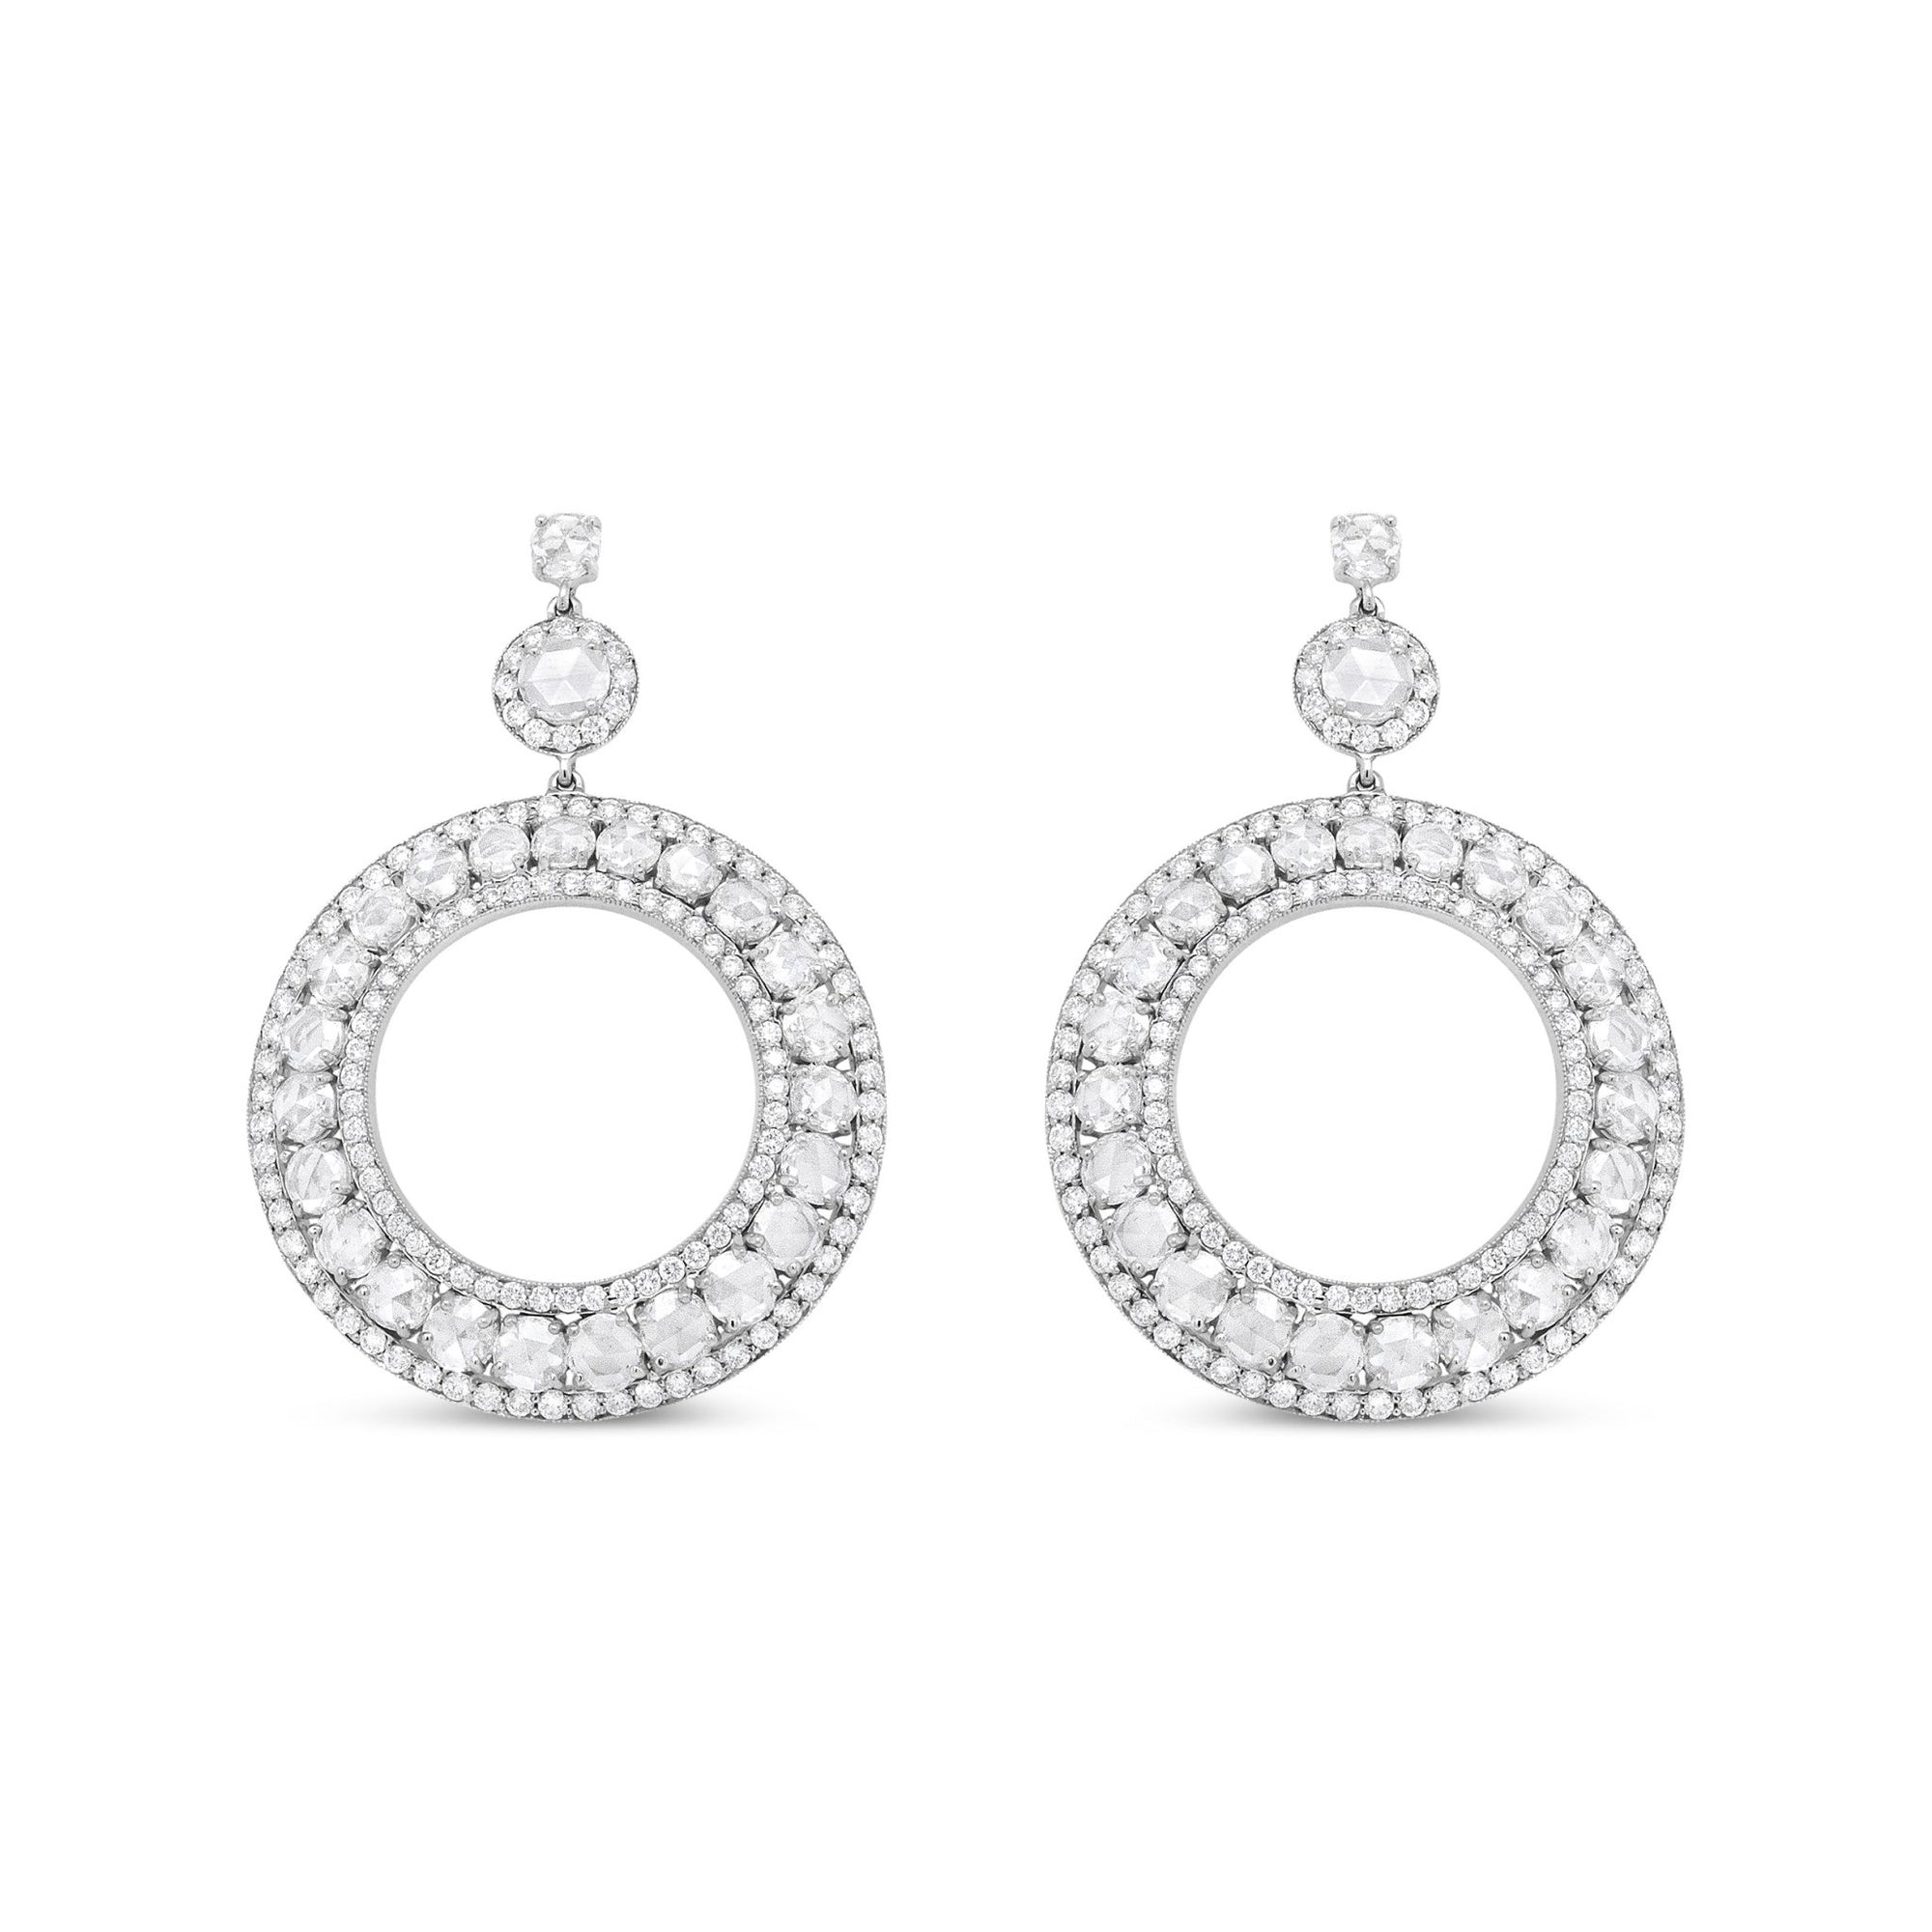 18K White Gold 10 7/8 Cttw Round Pave-Set Diamond Openwork Circle Wreath Hoop Dangle Drop Stud Earrings (SI1-SI2 Clarity, G-H Color) - LinkagejewelrydesignLinkagejewelrydesign